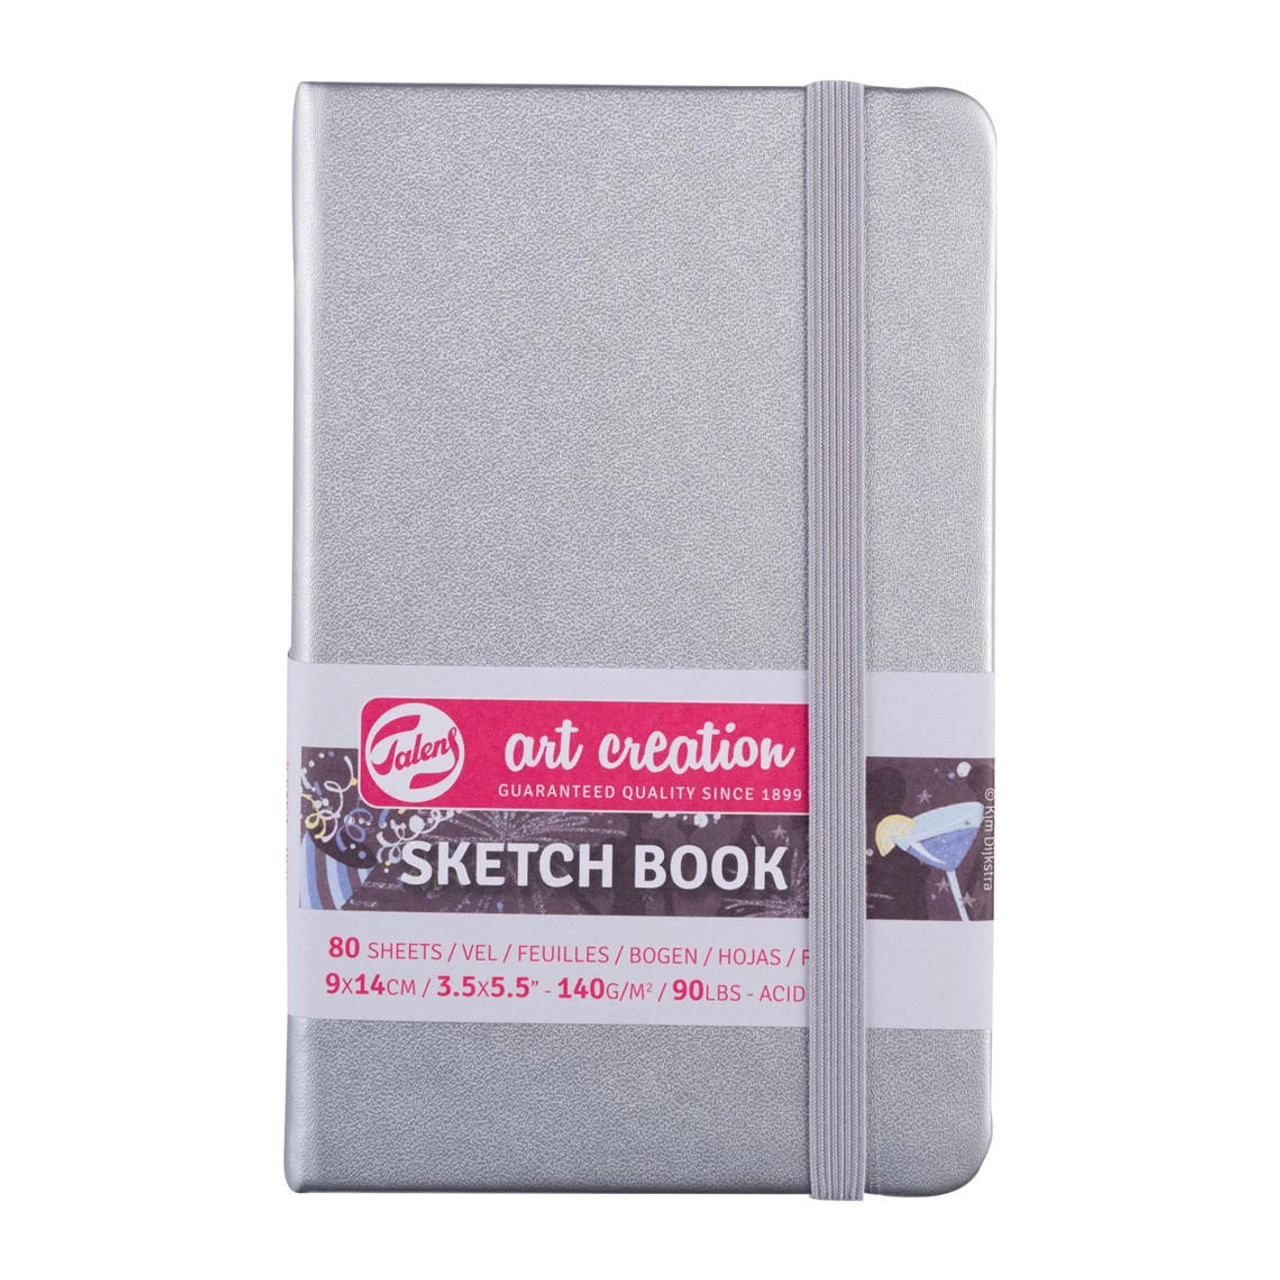 Leuchtturm1917 Sketchbook - Perfect for Your Artistic Creations